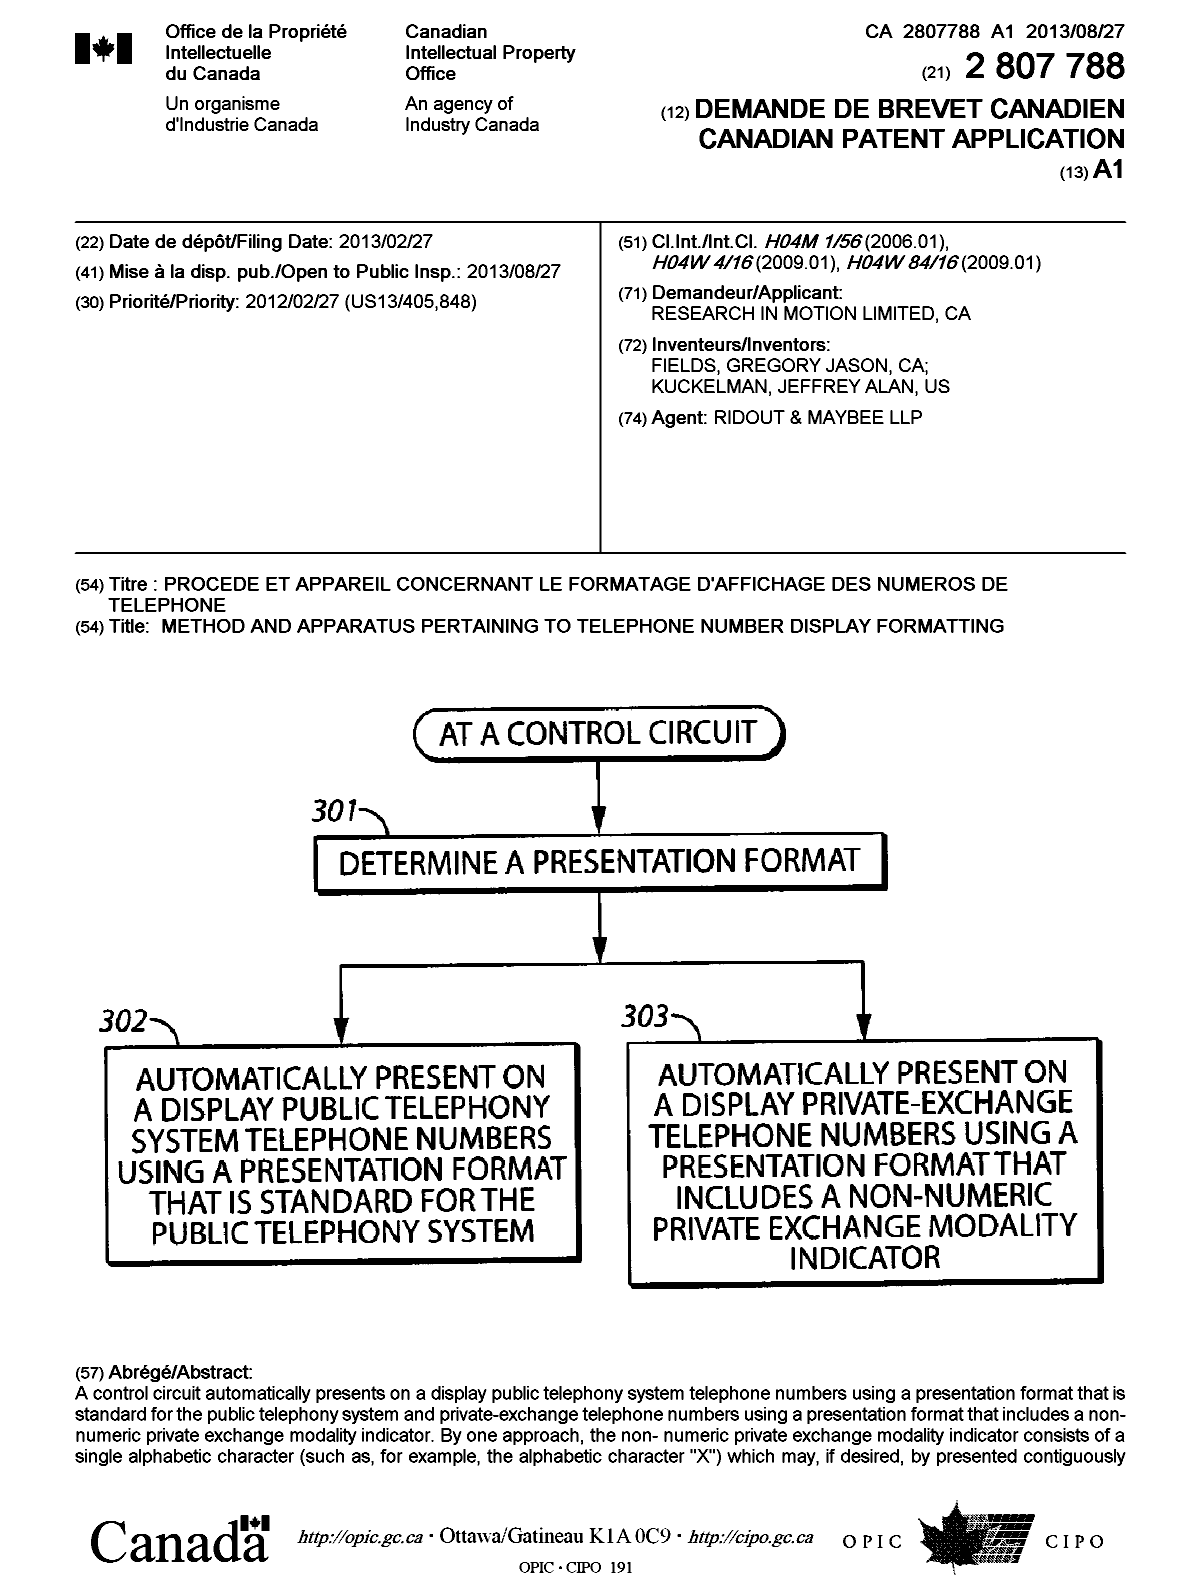 Canadian Patent Document 2807788. Cover Page 20121203. Image 1 of 2